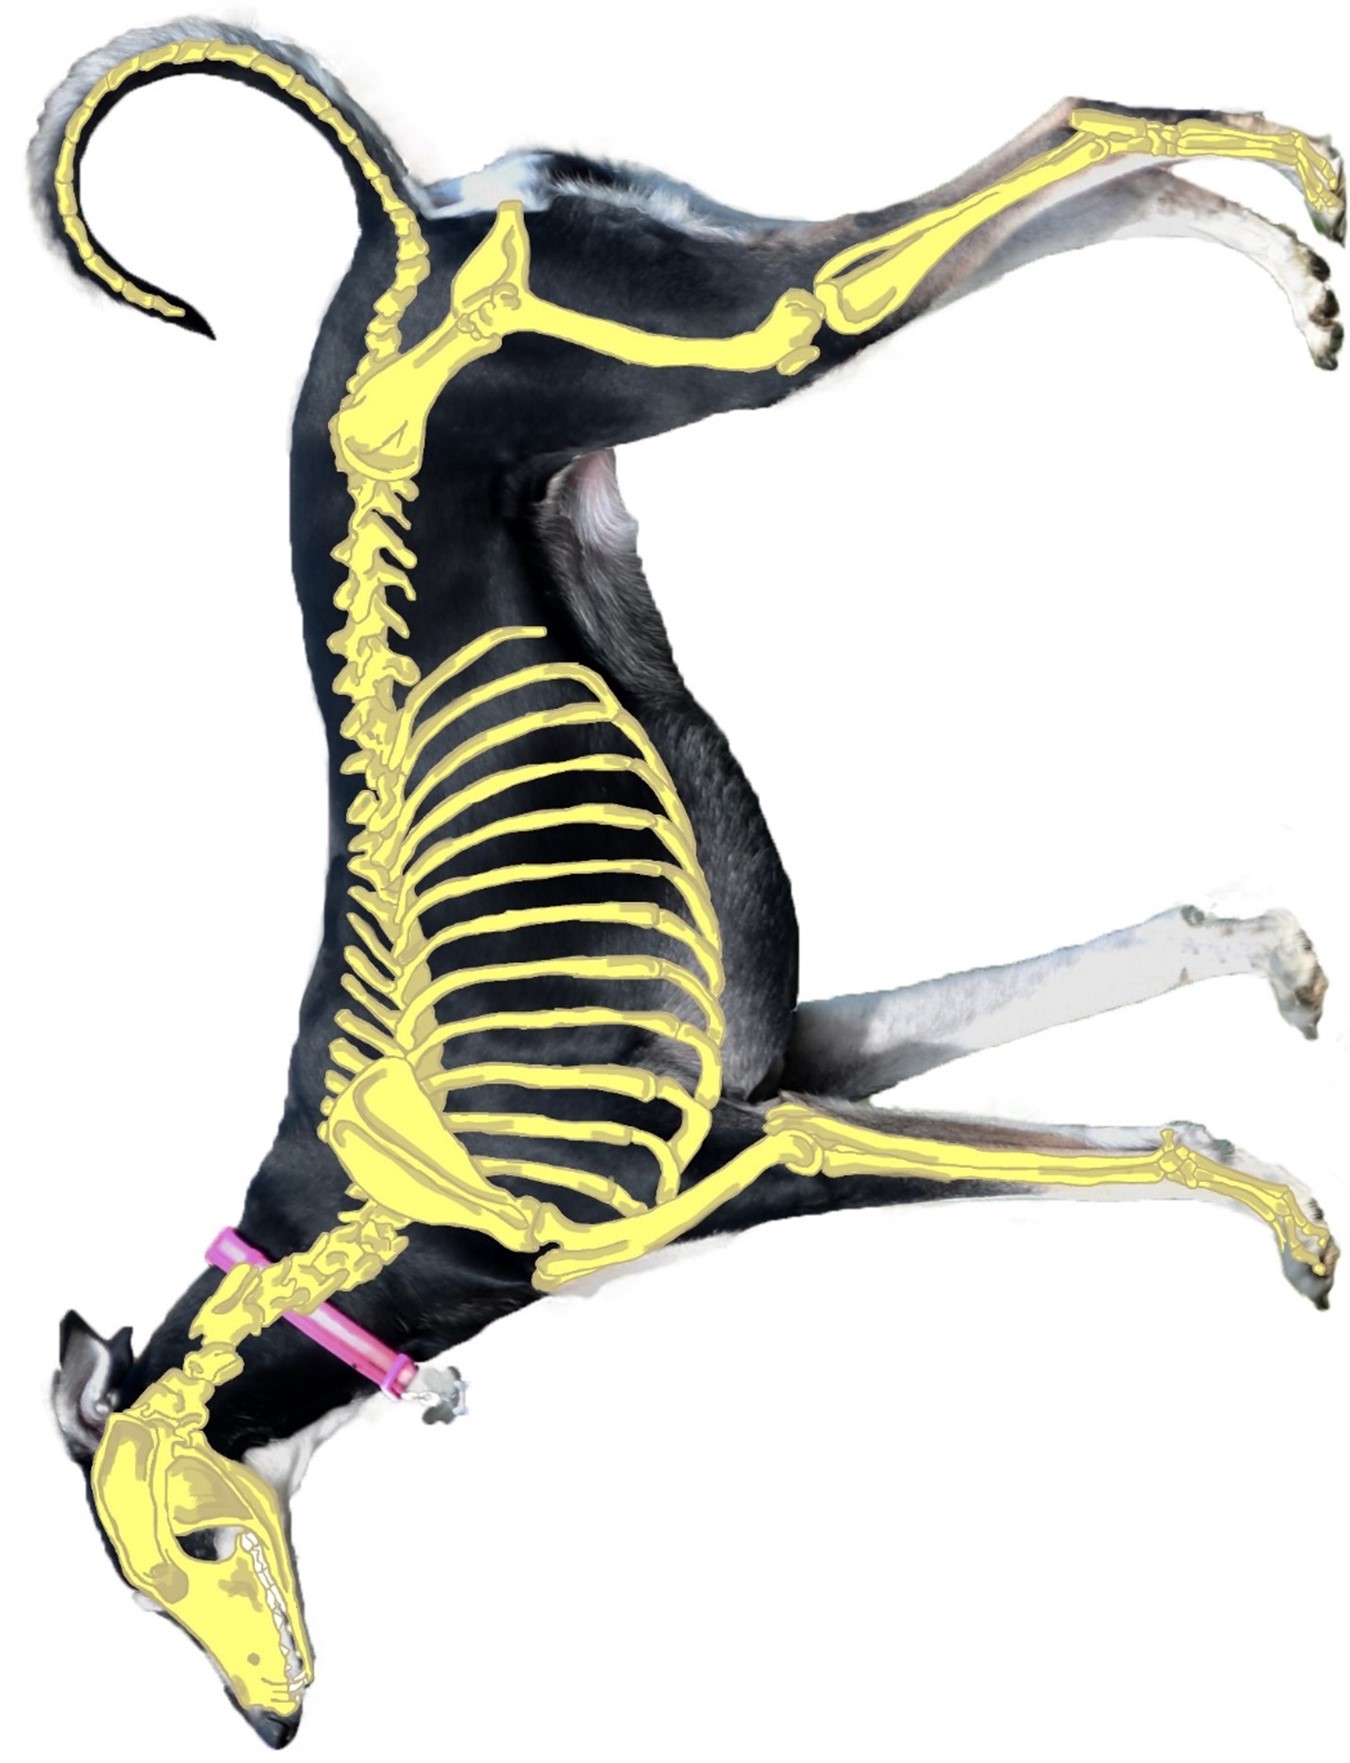 Canine Anatomy and Physiology (E-Learning)